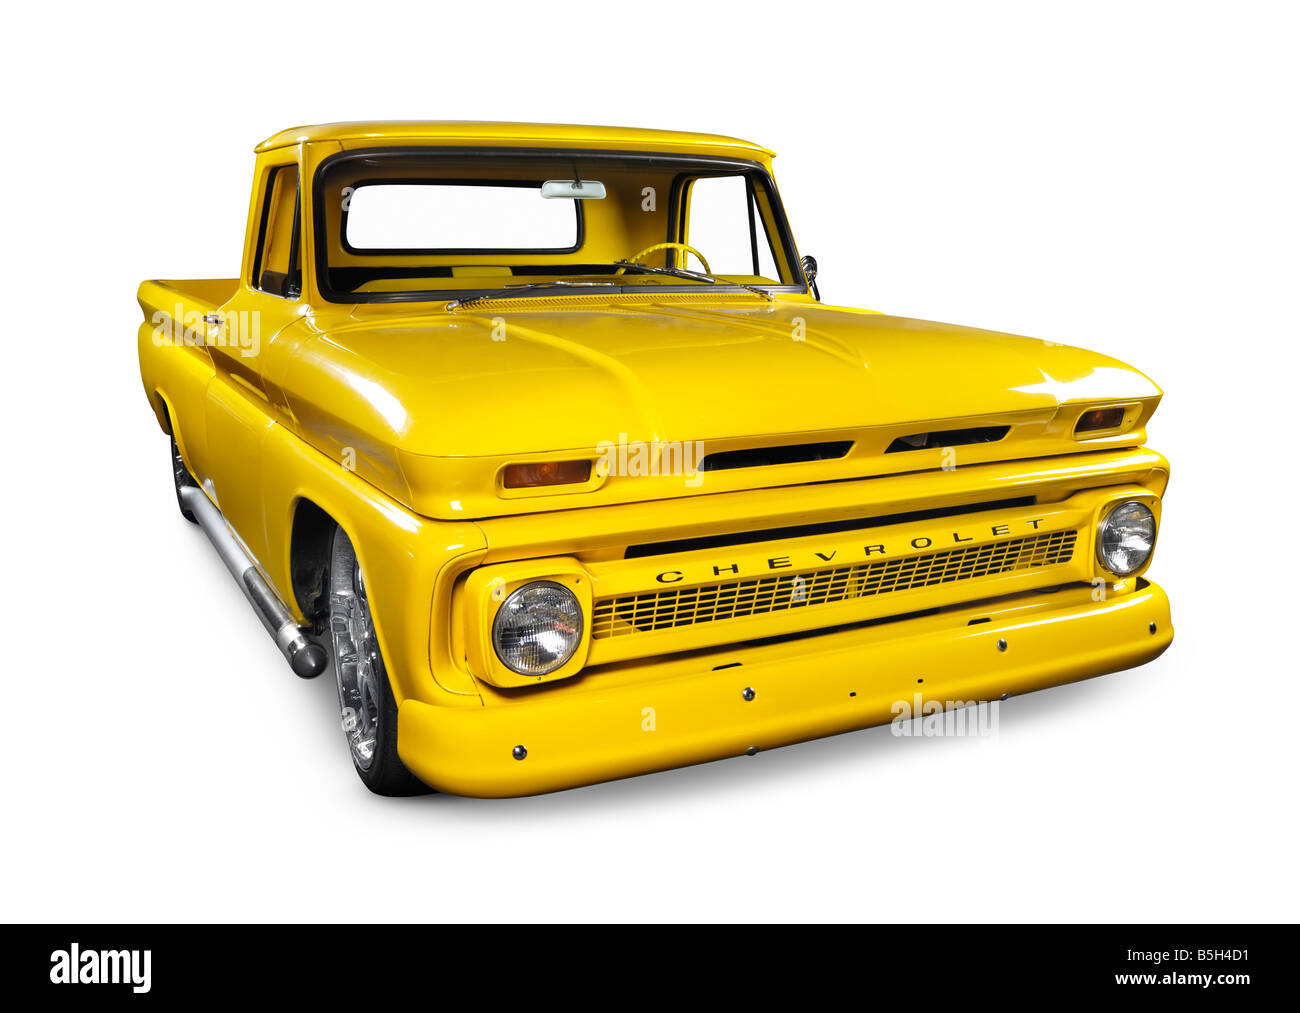 License and prints at MaximImages.com - 1960s Chevrolet pickup truck Stock Photo